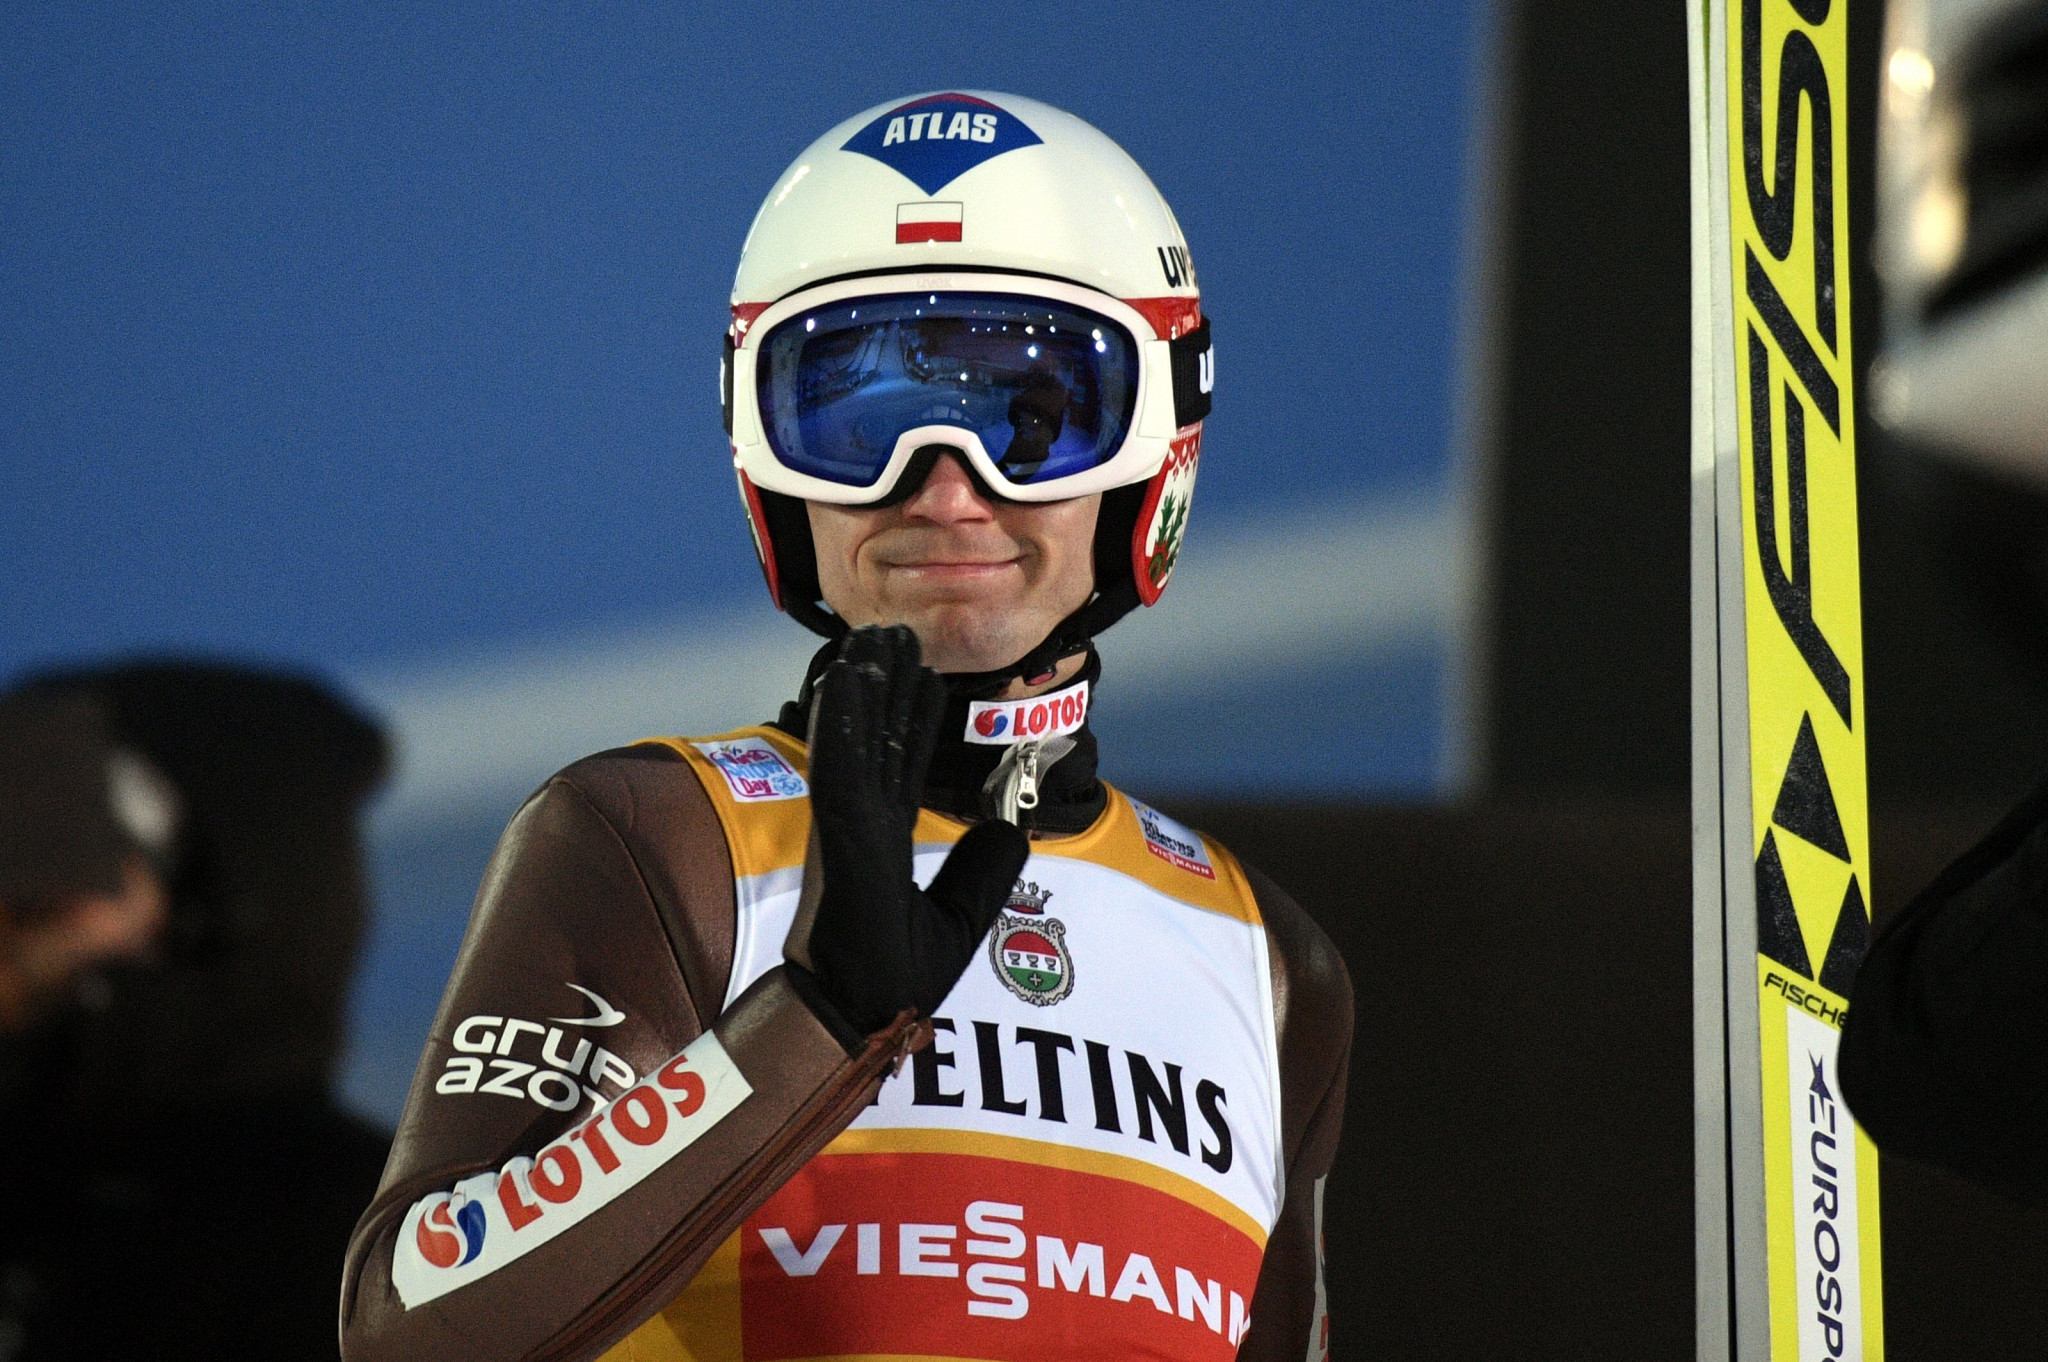 Kamil Stoch is the reigning Olympic large hill champion ©Getty Images